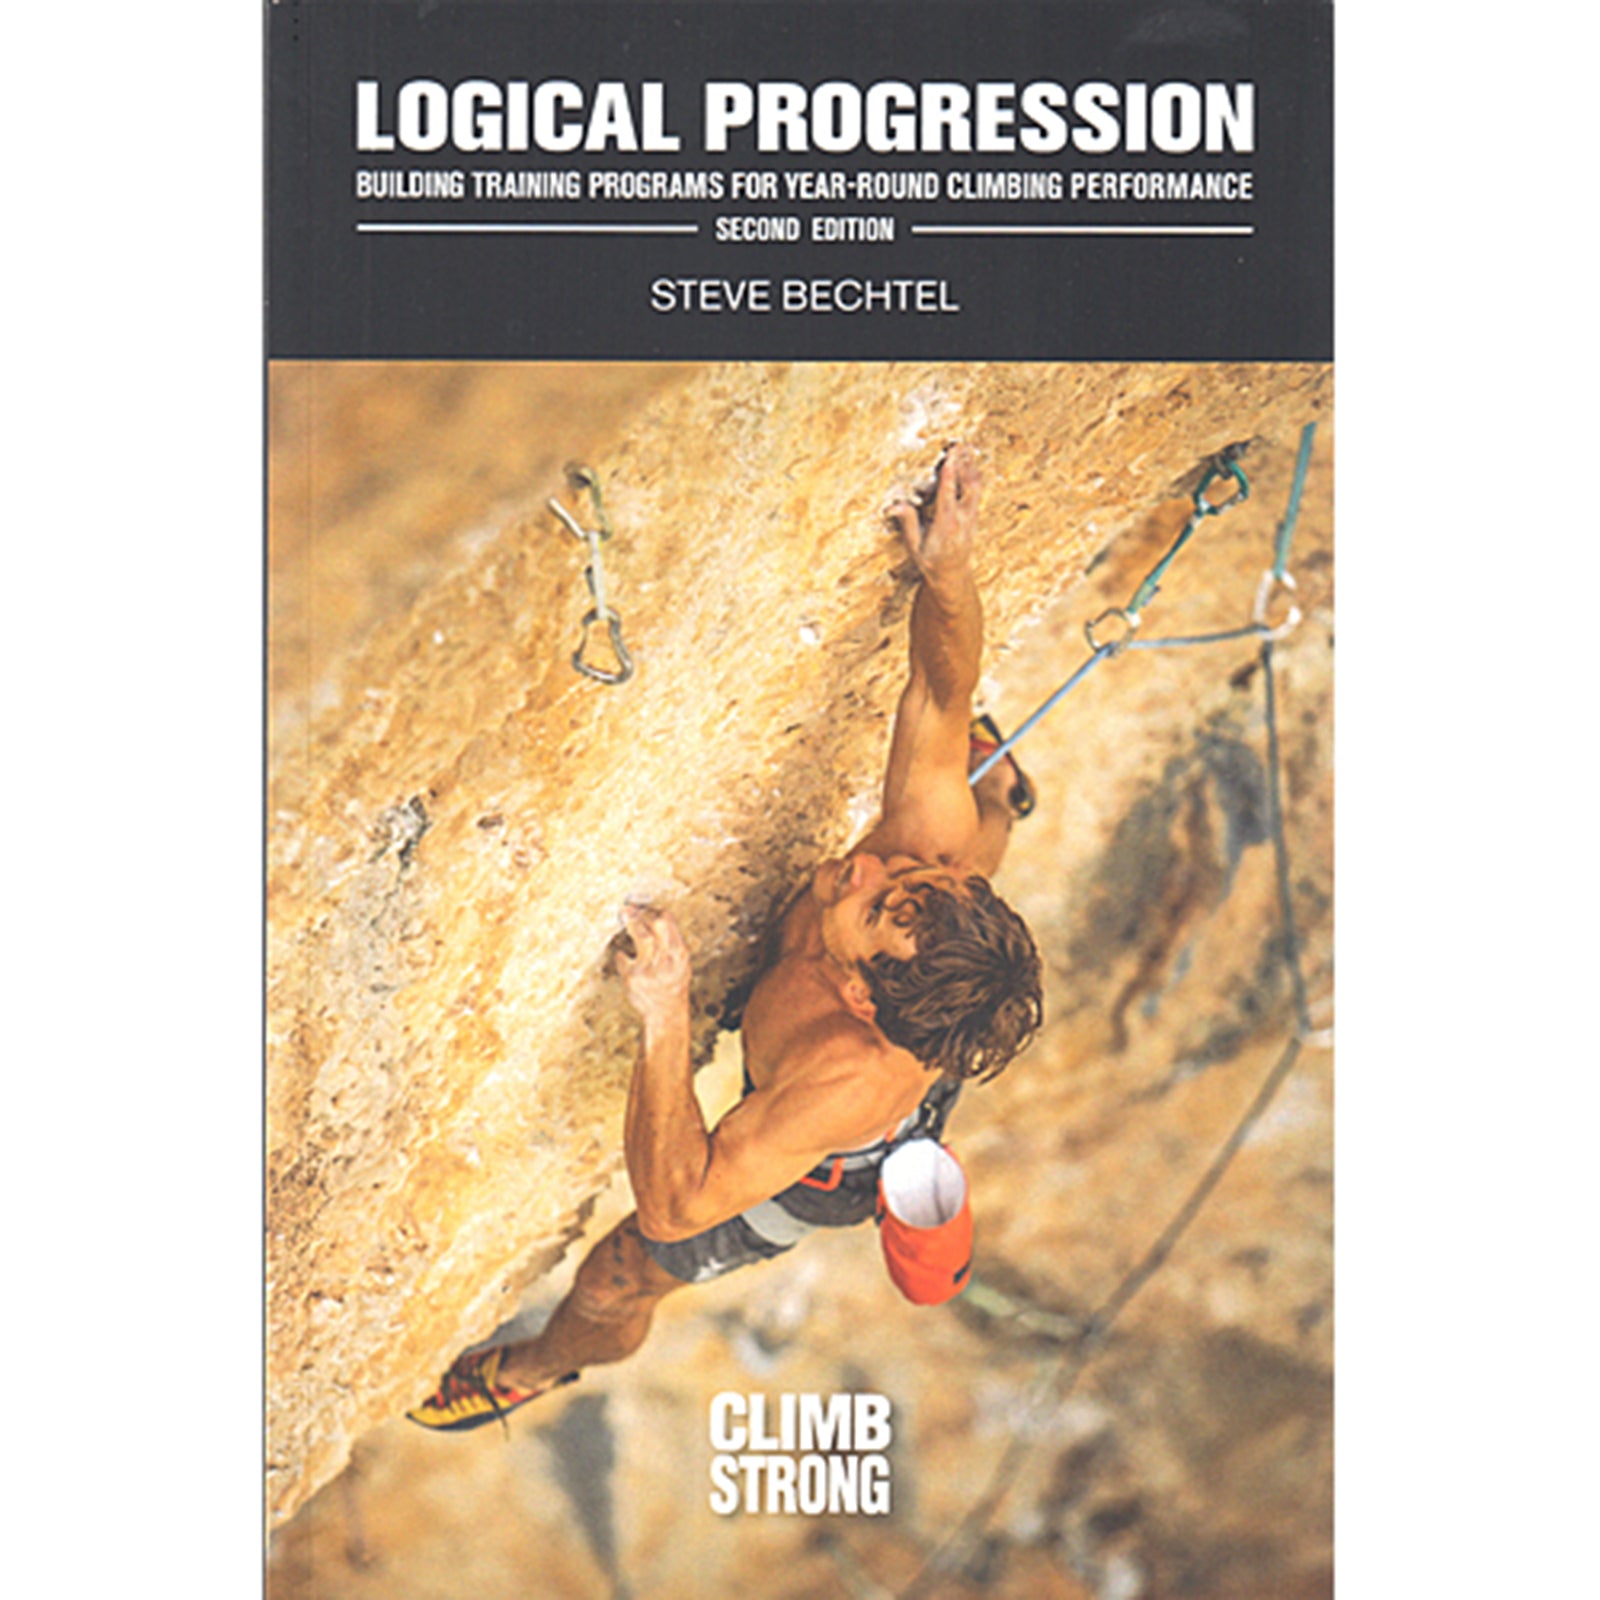 a fit looking man leads up steep rock on the cover of the book l ogical progression